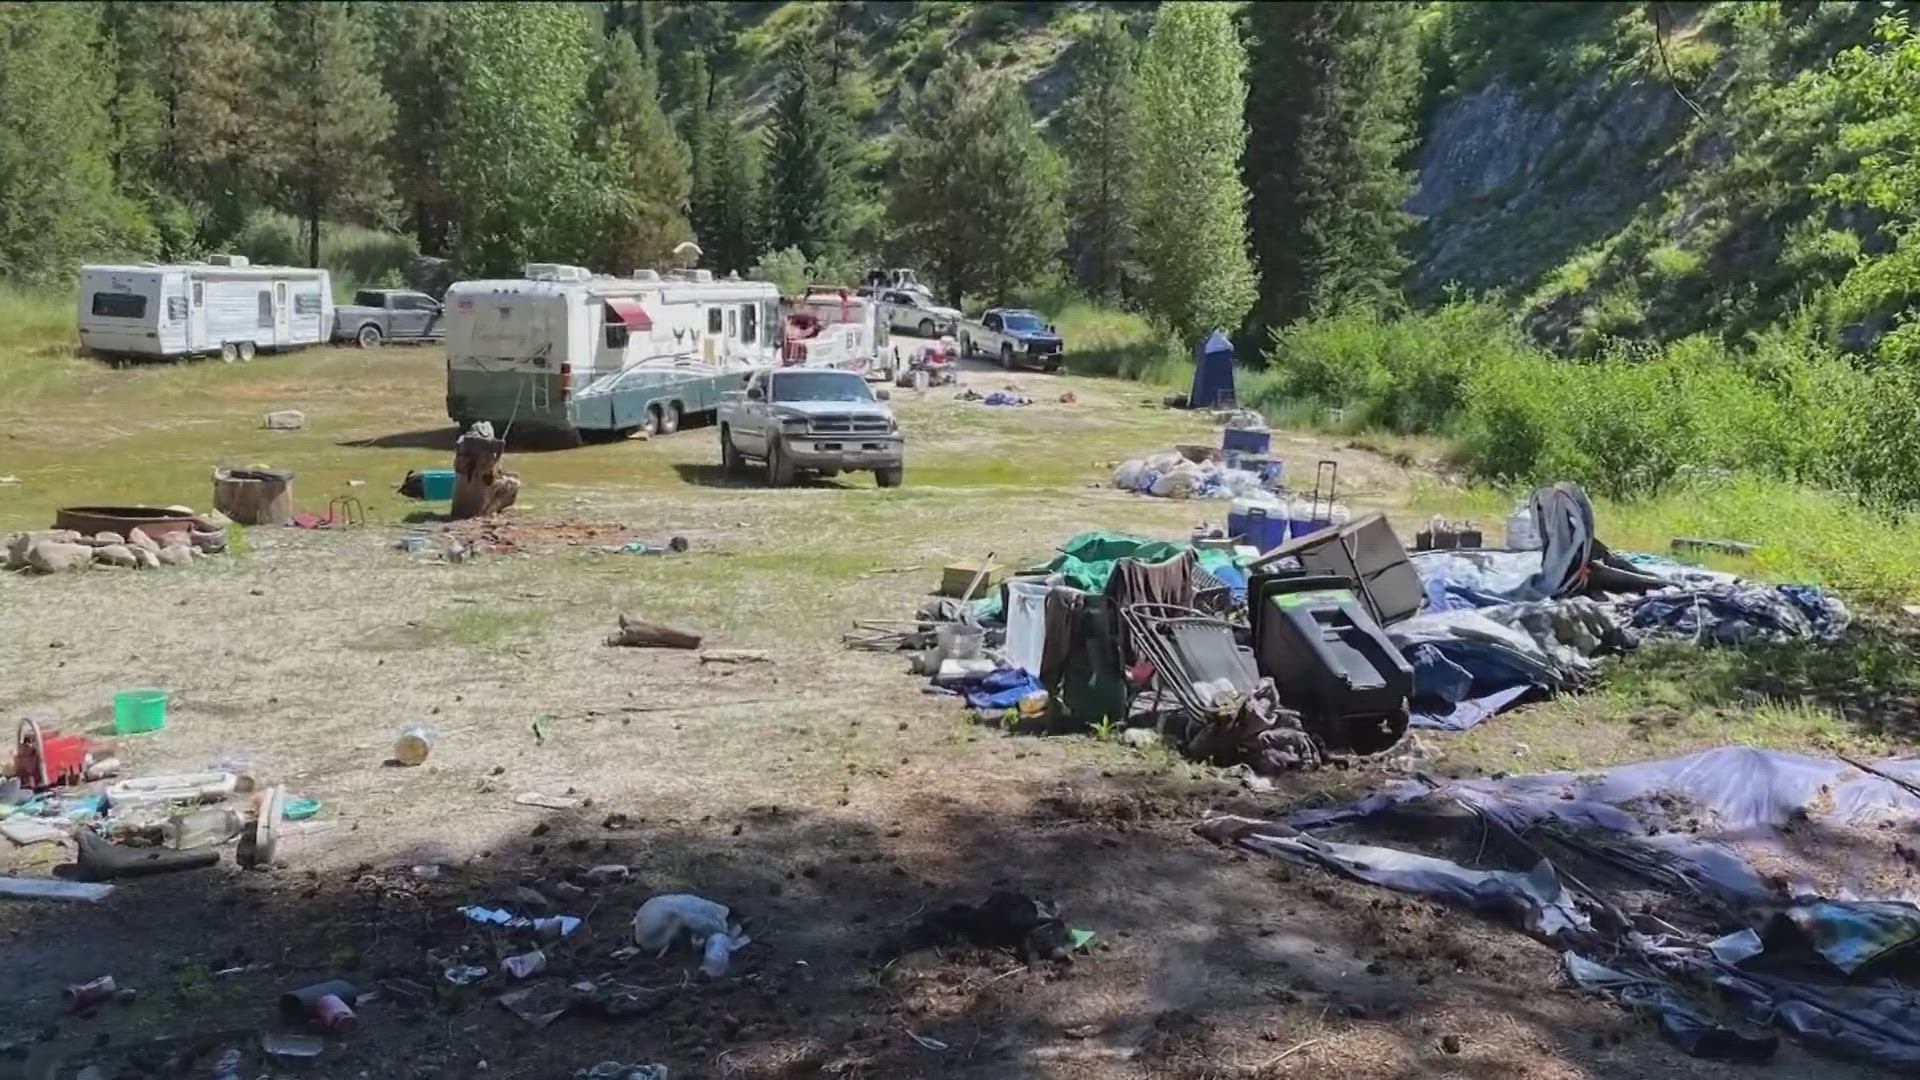 The Boise National Forest receives regular reports about trash at campsites, an issue that has led to access at recreation areas being limited in the past.